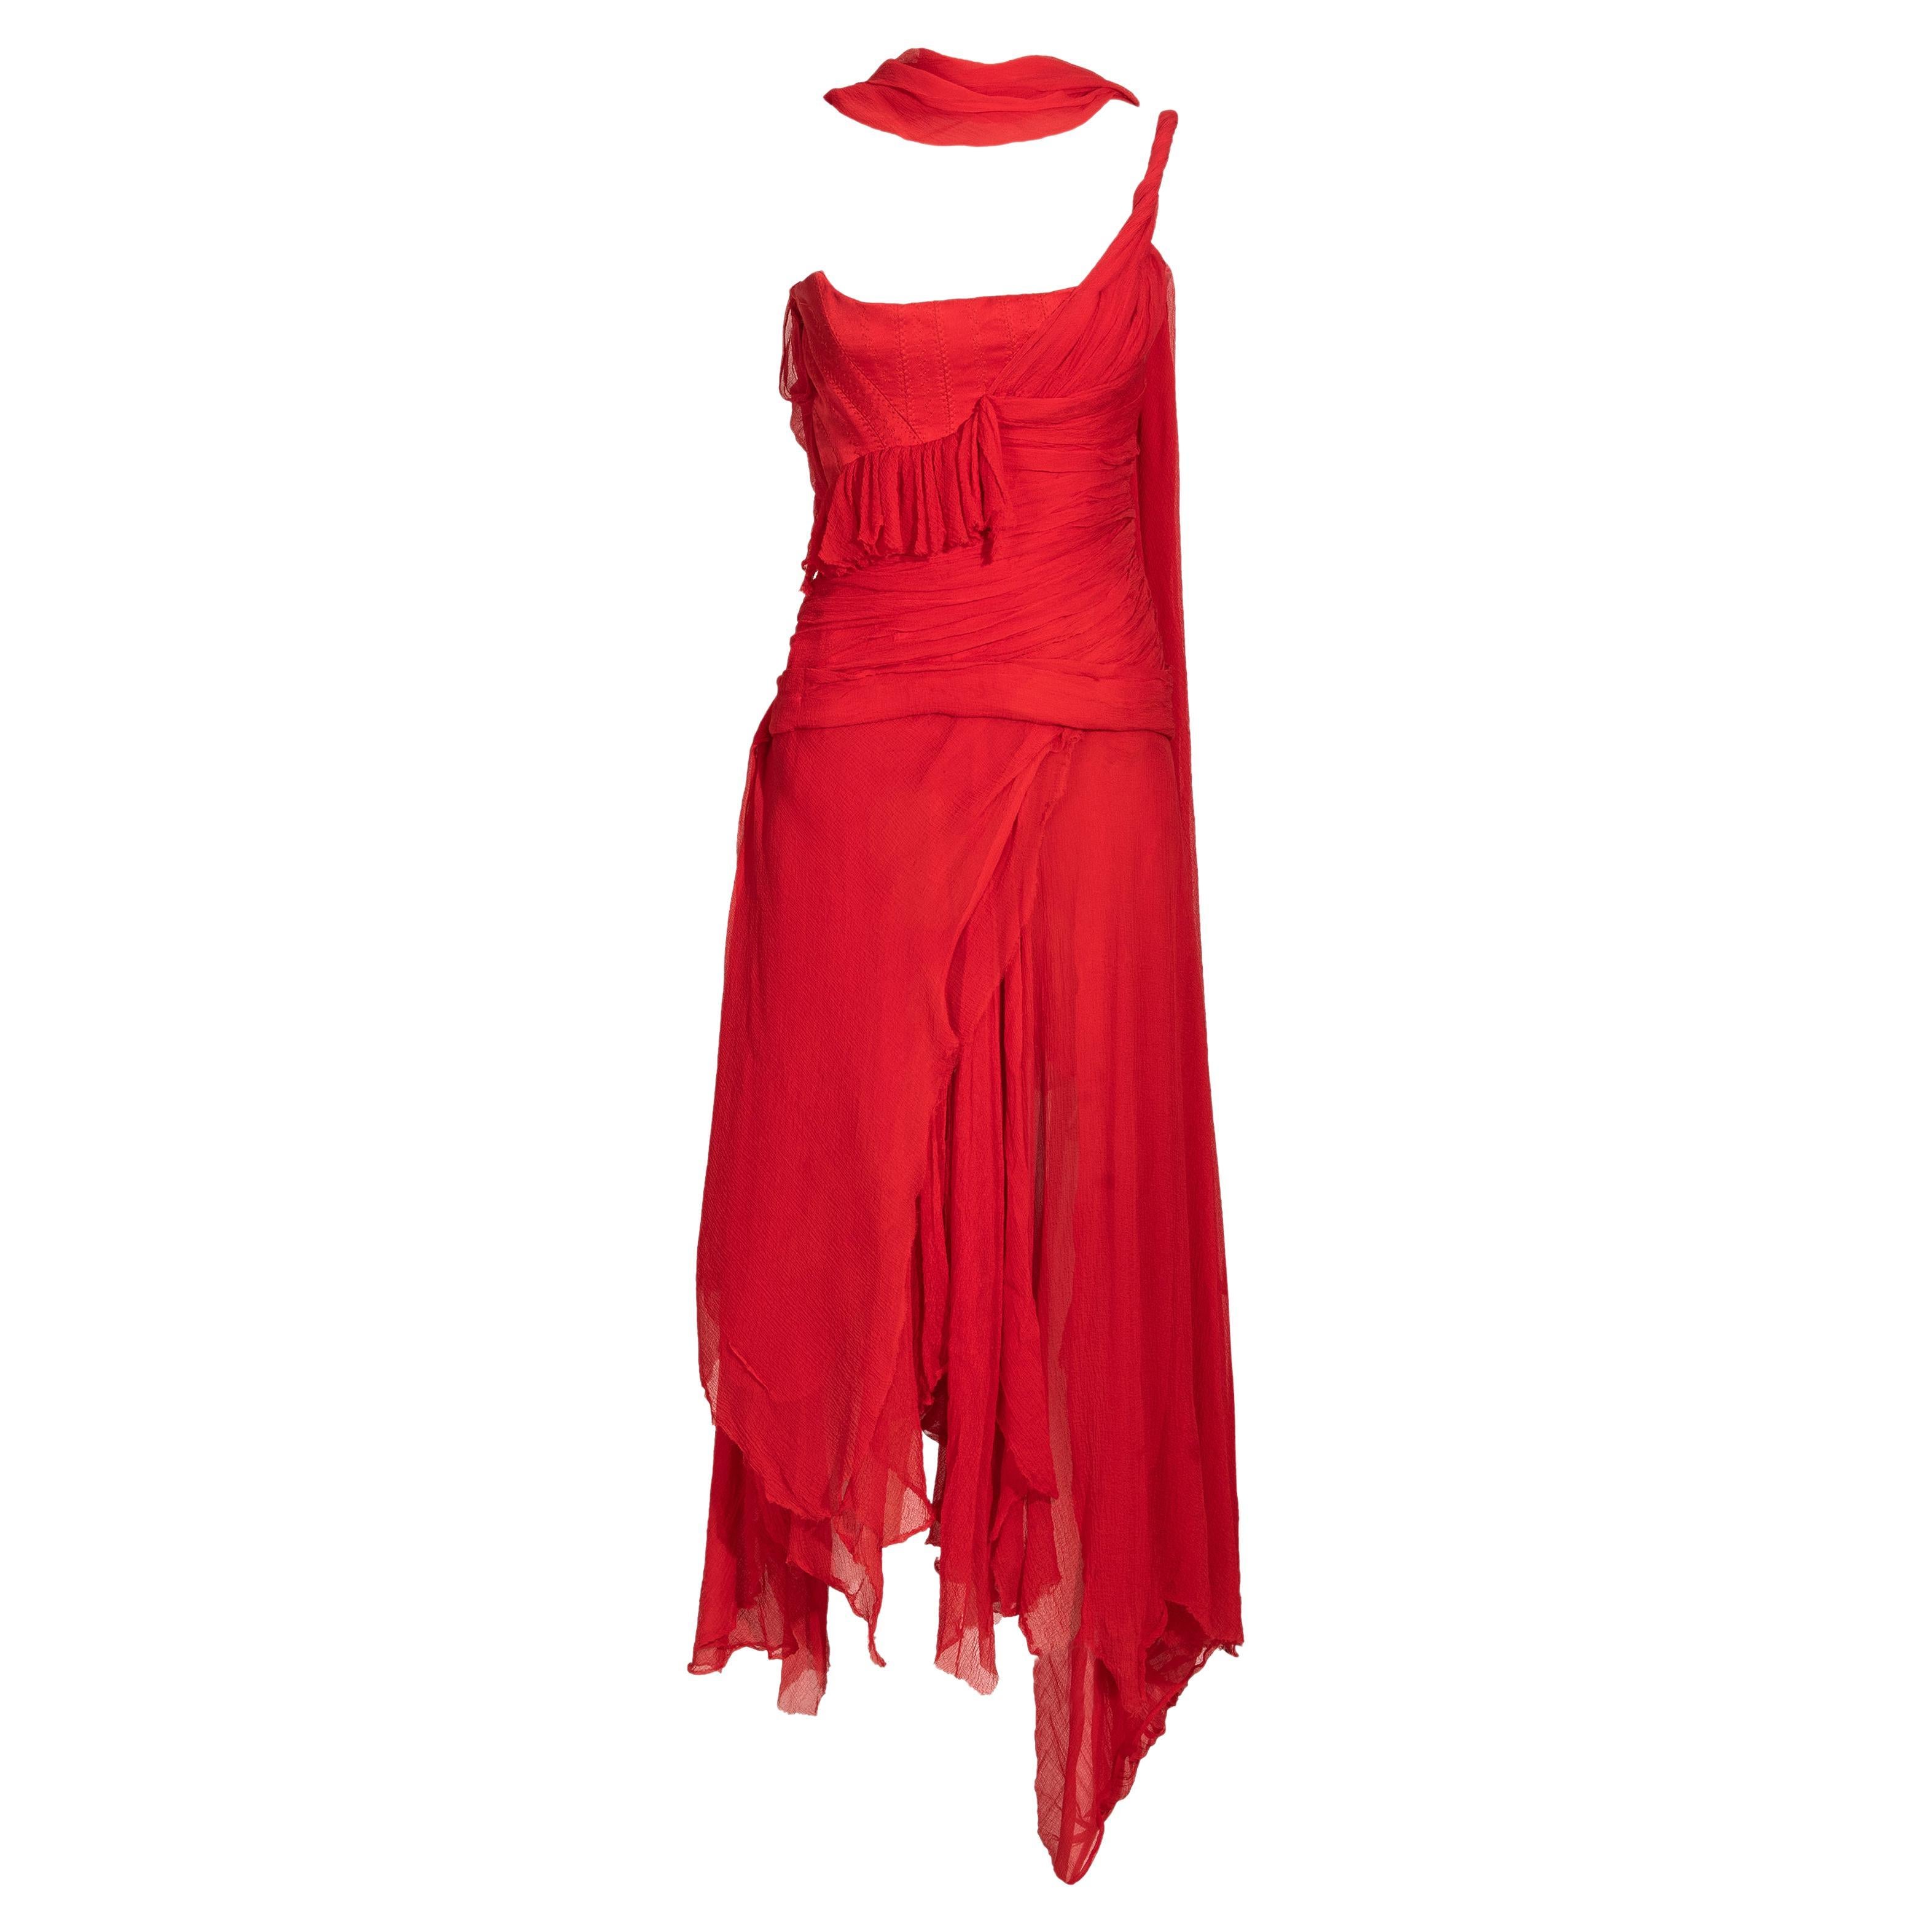 S/S 2003 Alexander McQueen  'Irere' Collection Red Silk Chiffon Gown with Sash For Sale